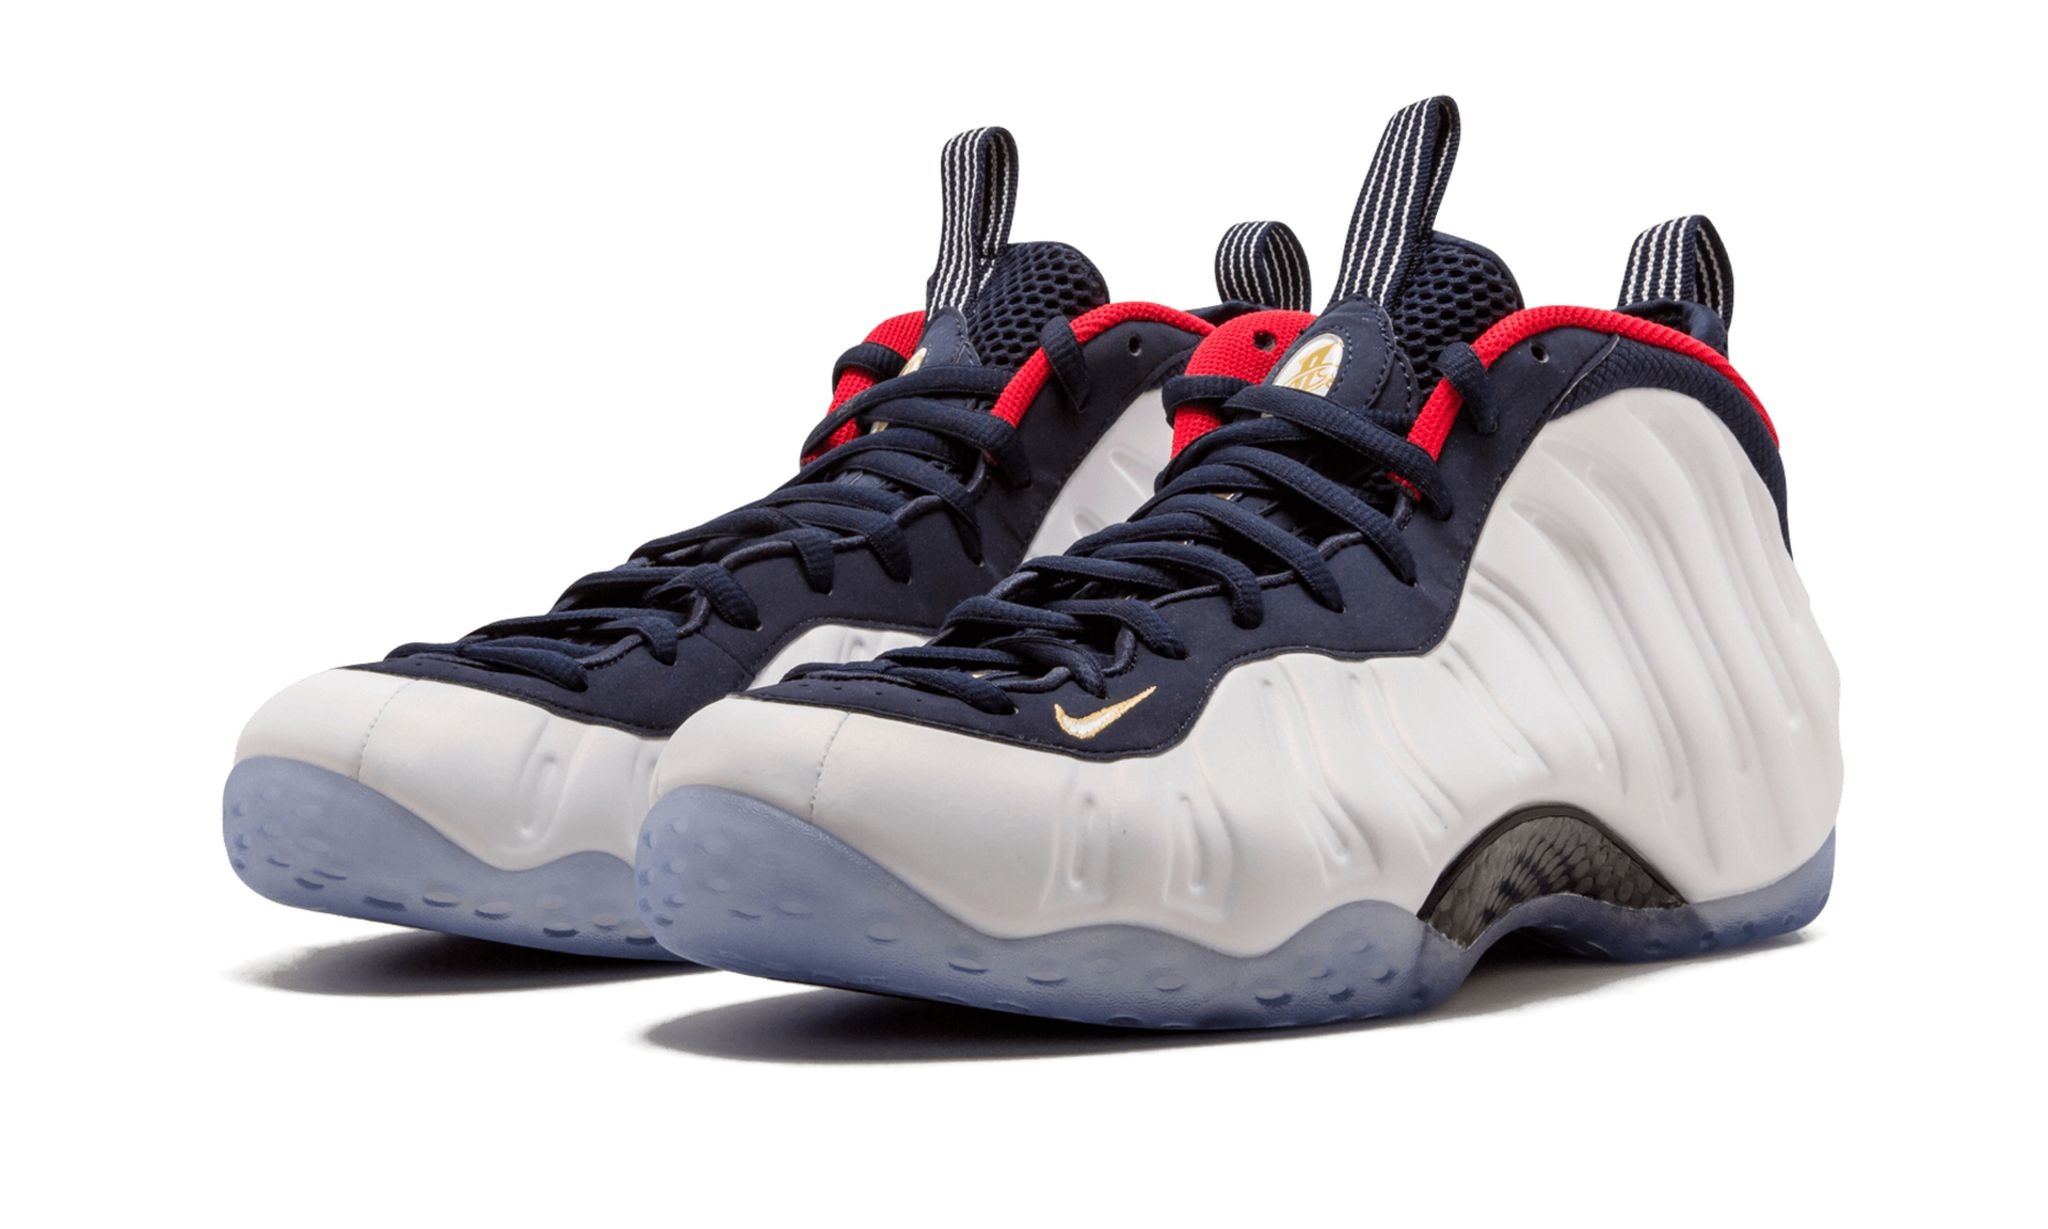 Air Foamposite One PRM "Olympic" - 2